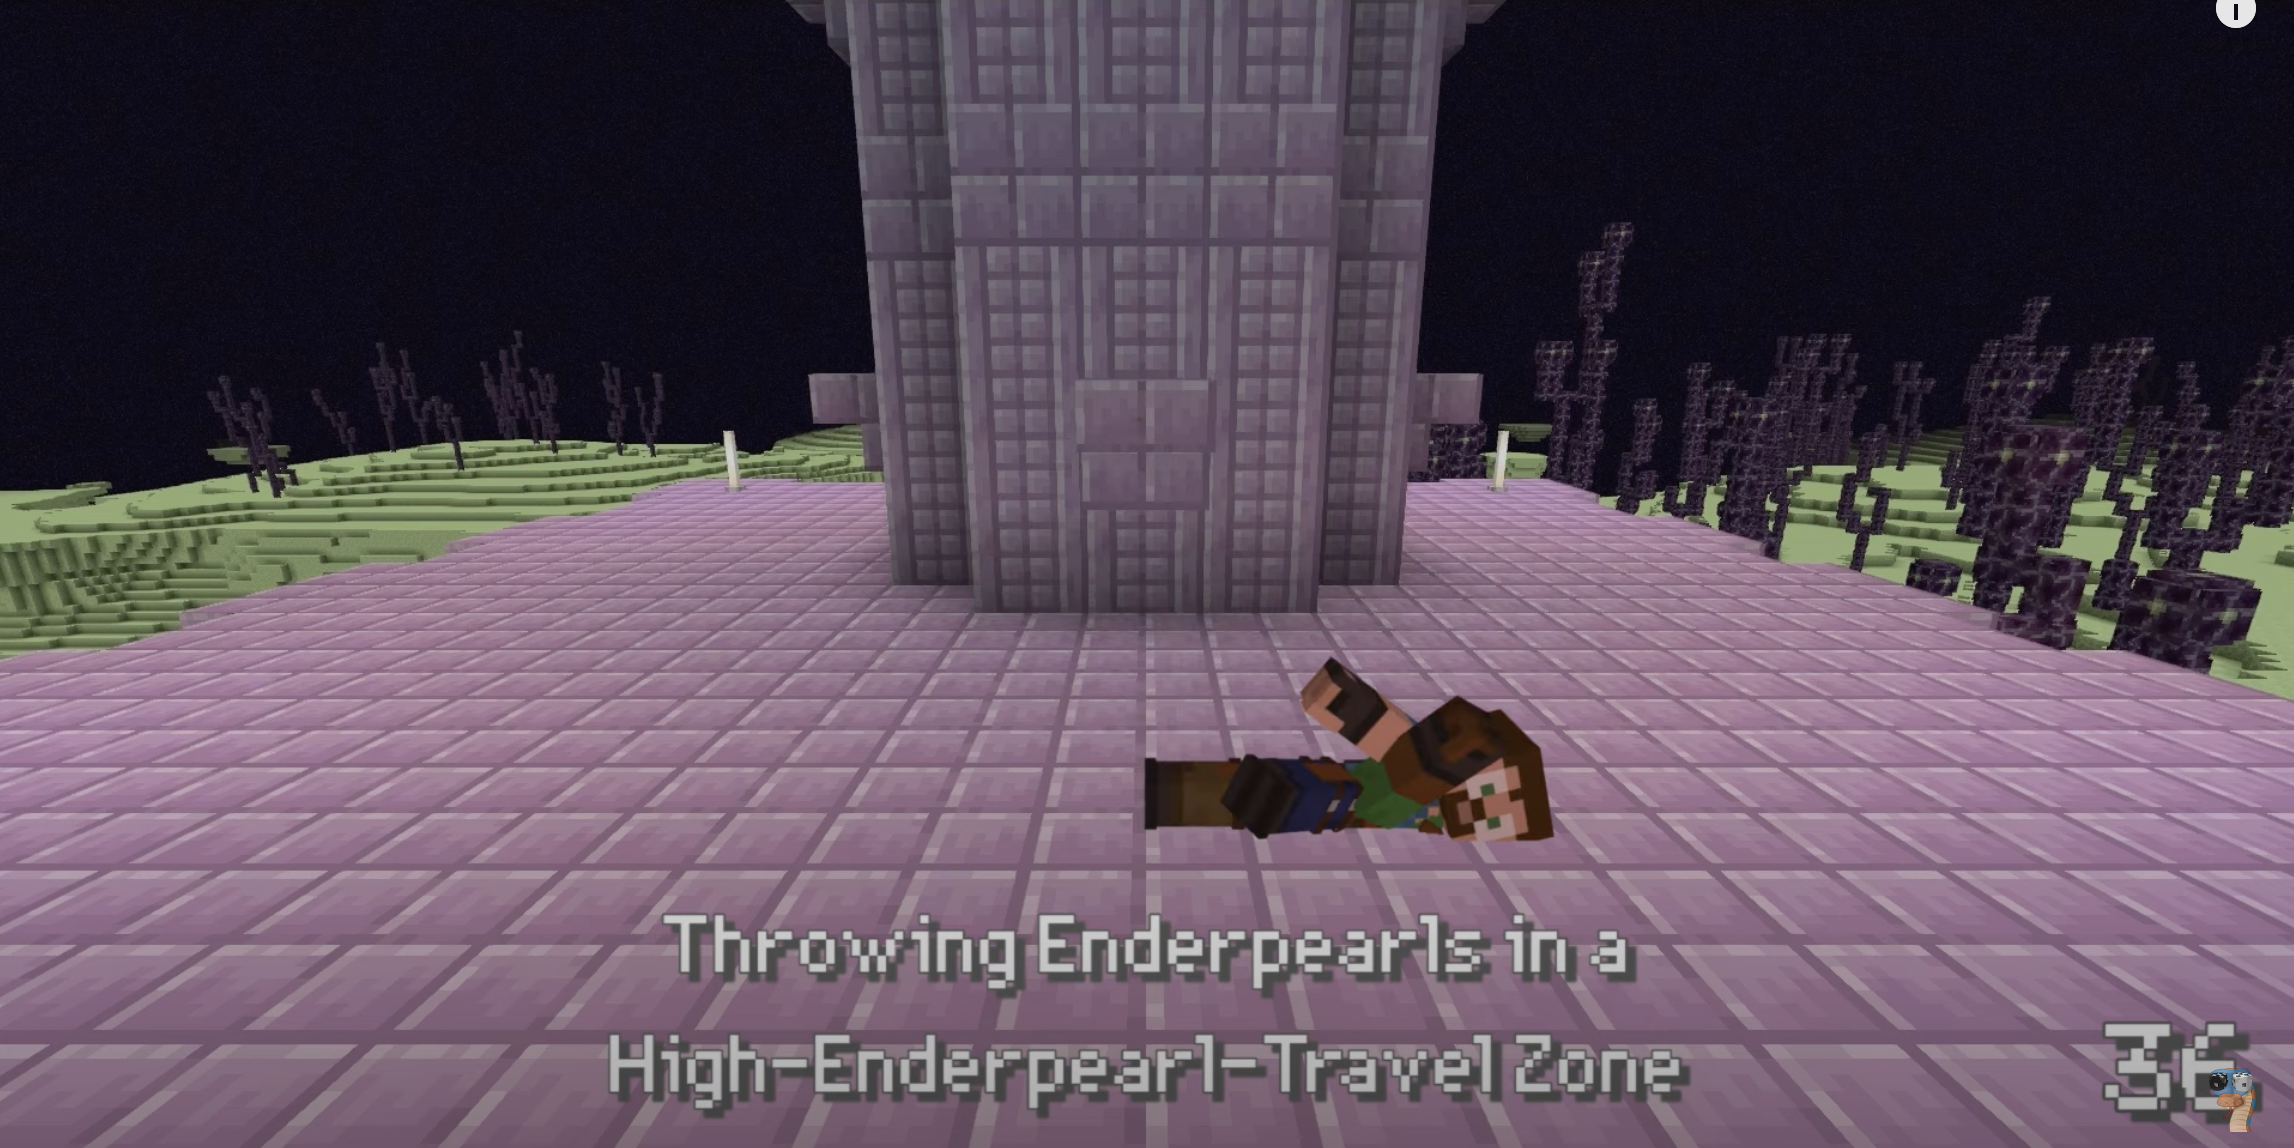 It's way too many enderpearls #minecraft #fypシ #minecrafter